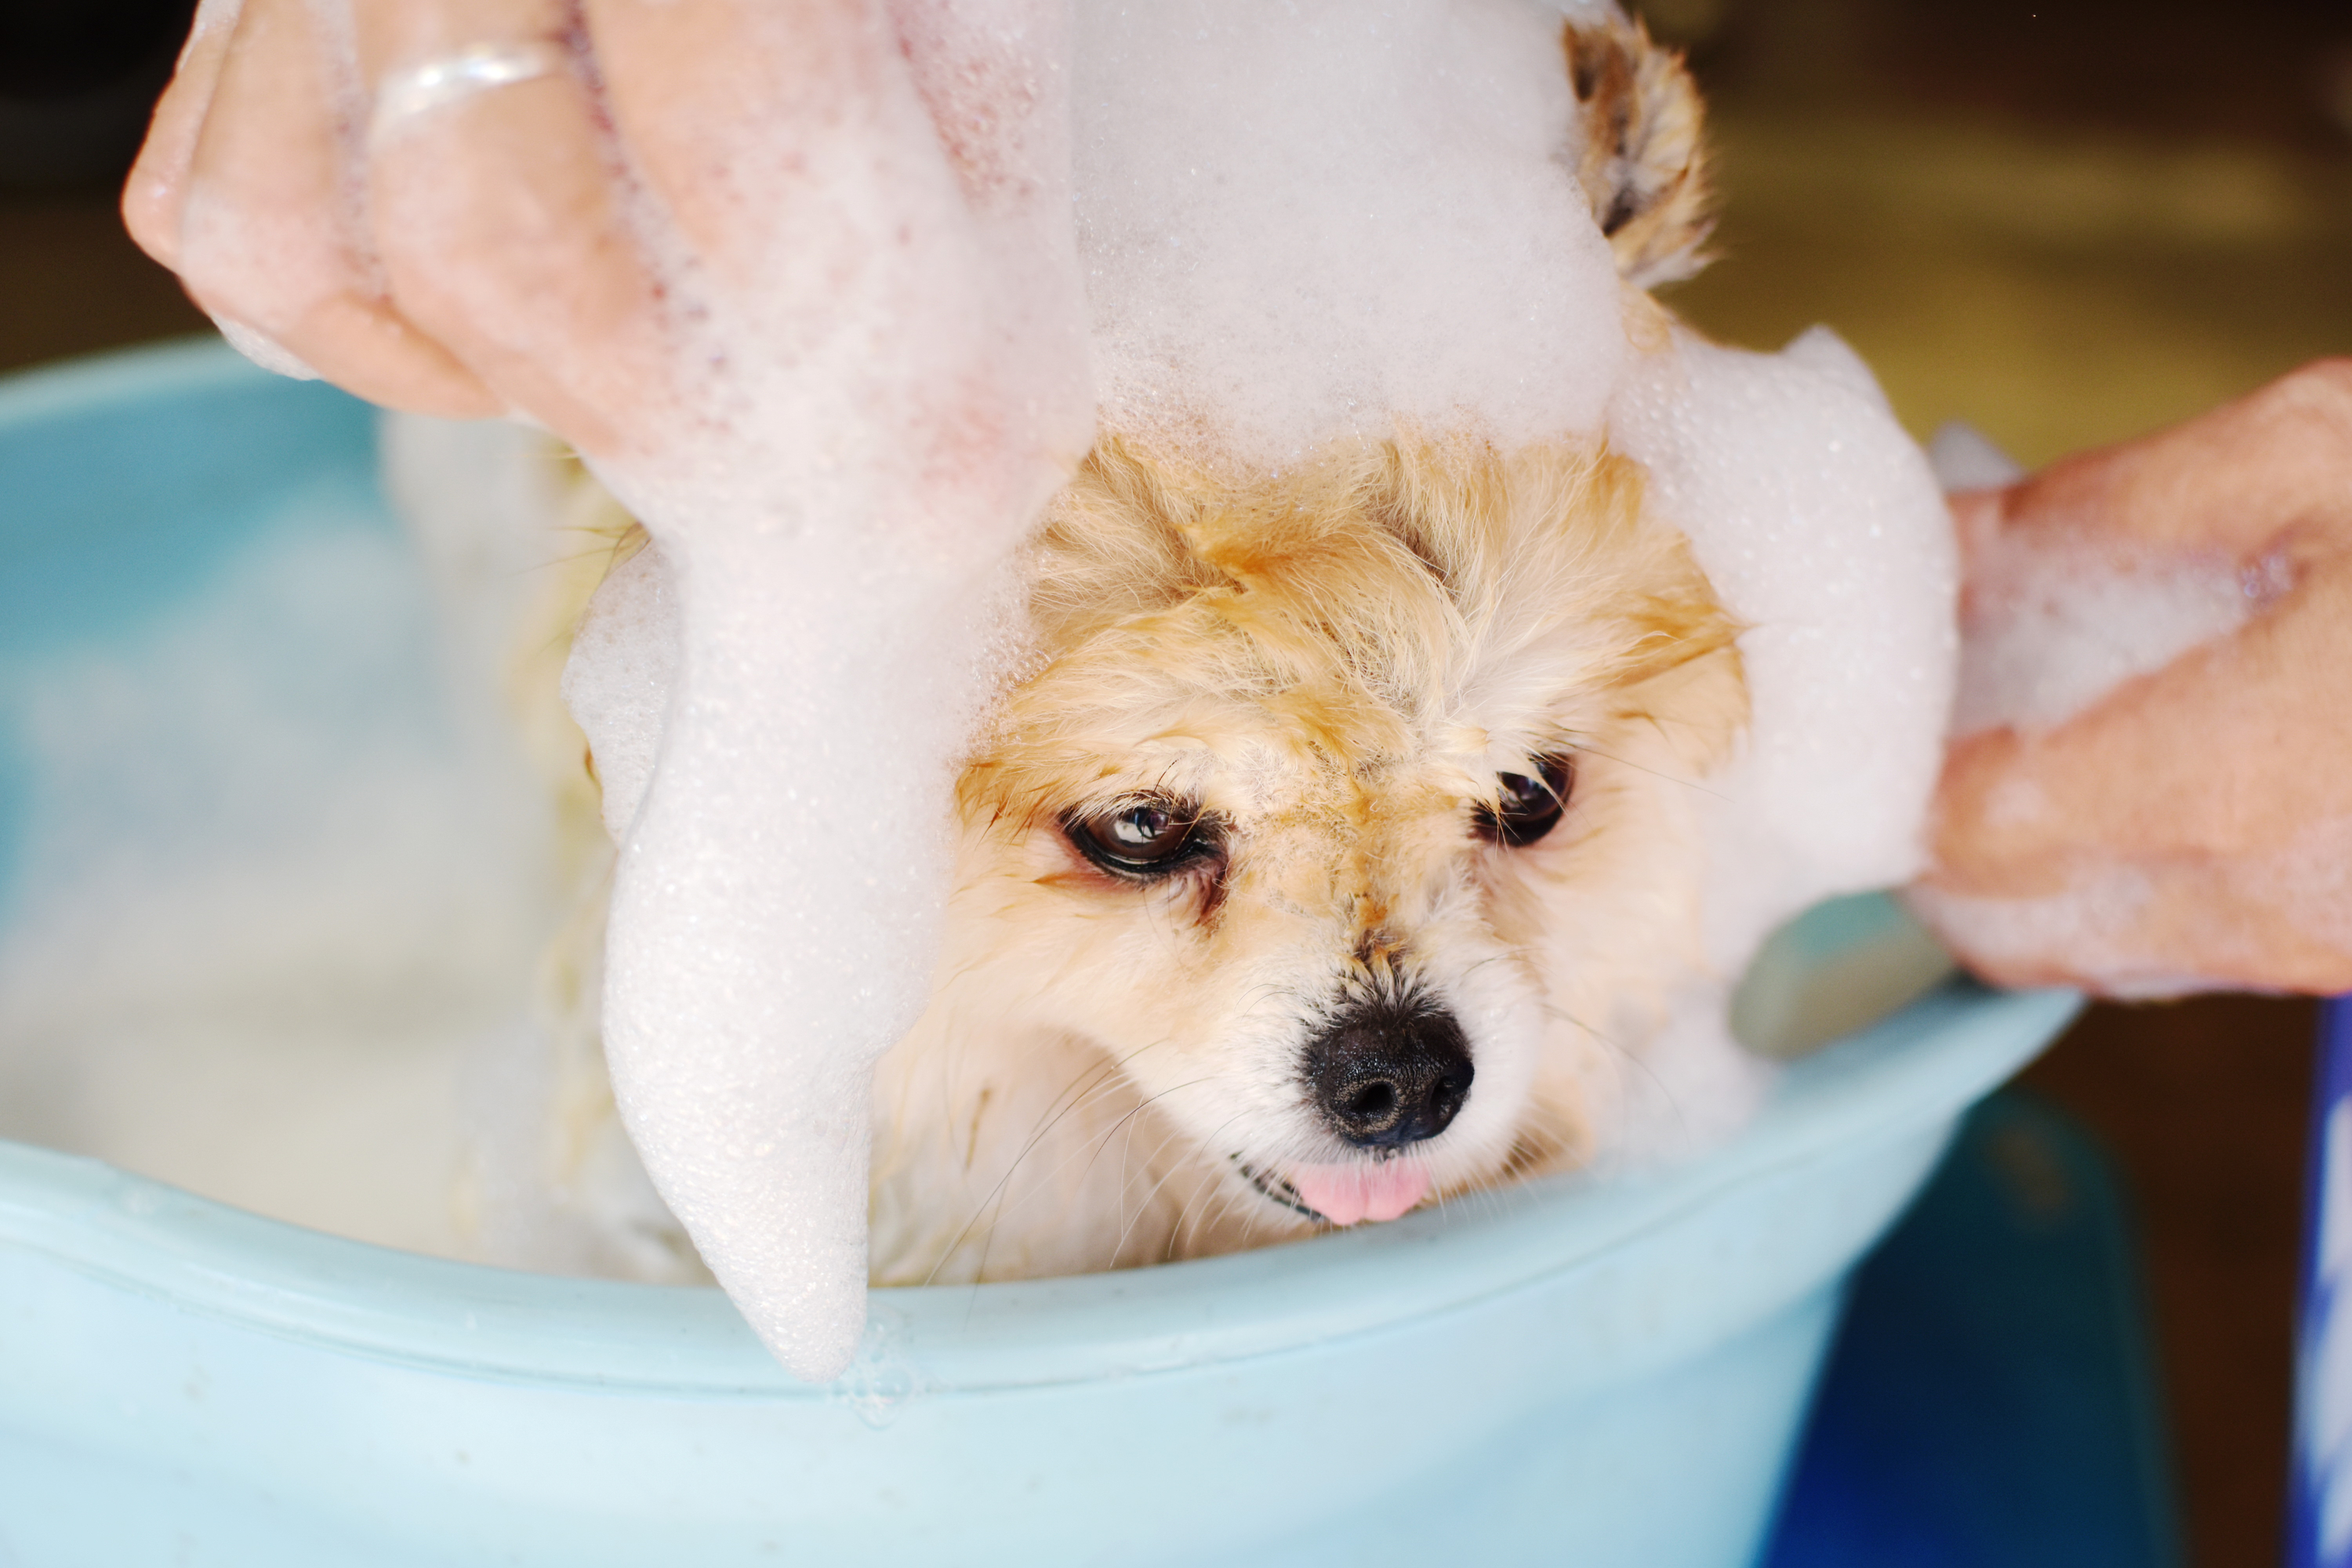 gentle shampoos used for bathing senior dogs